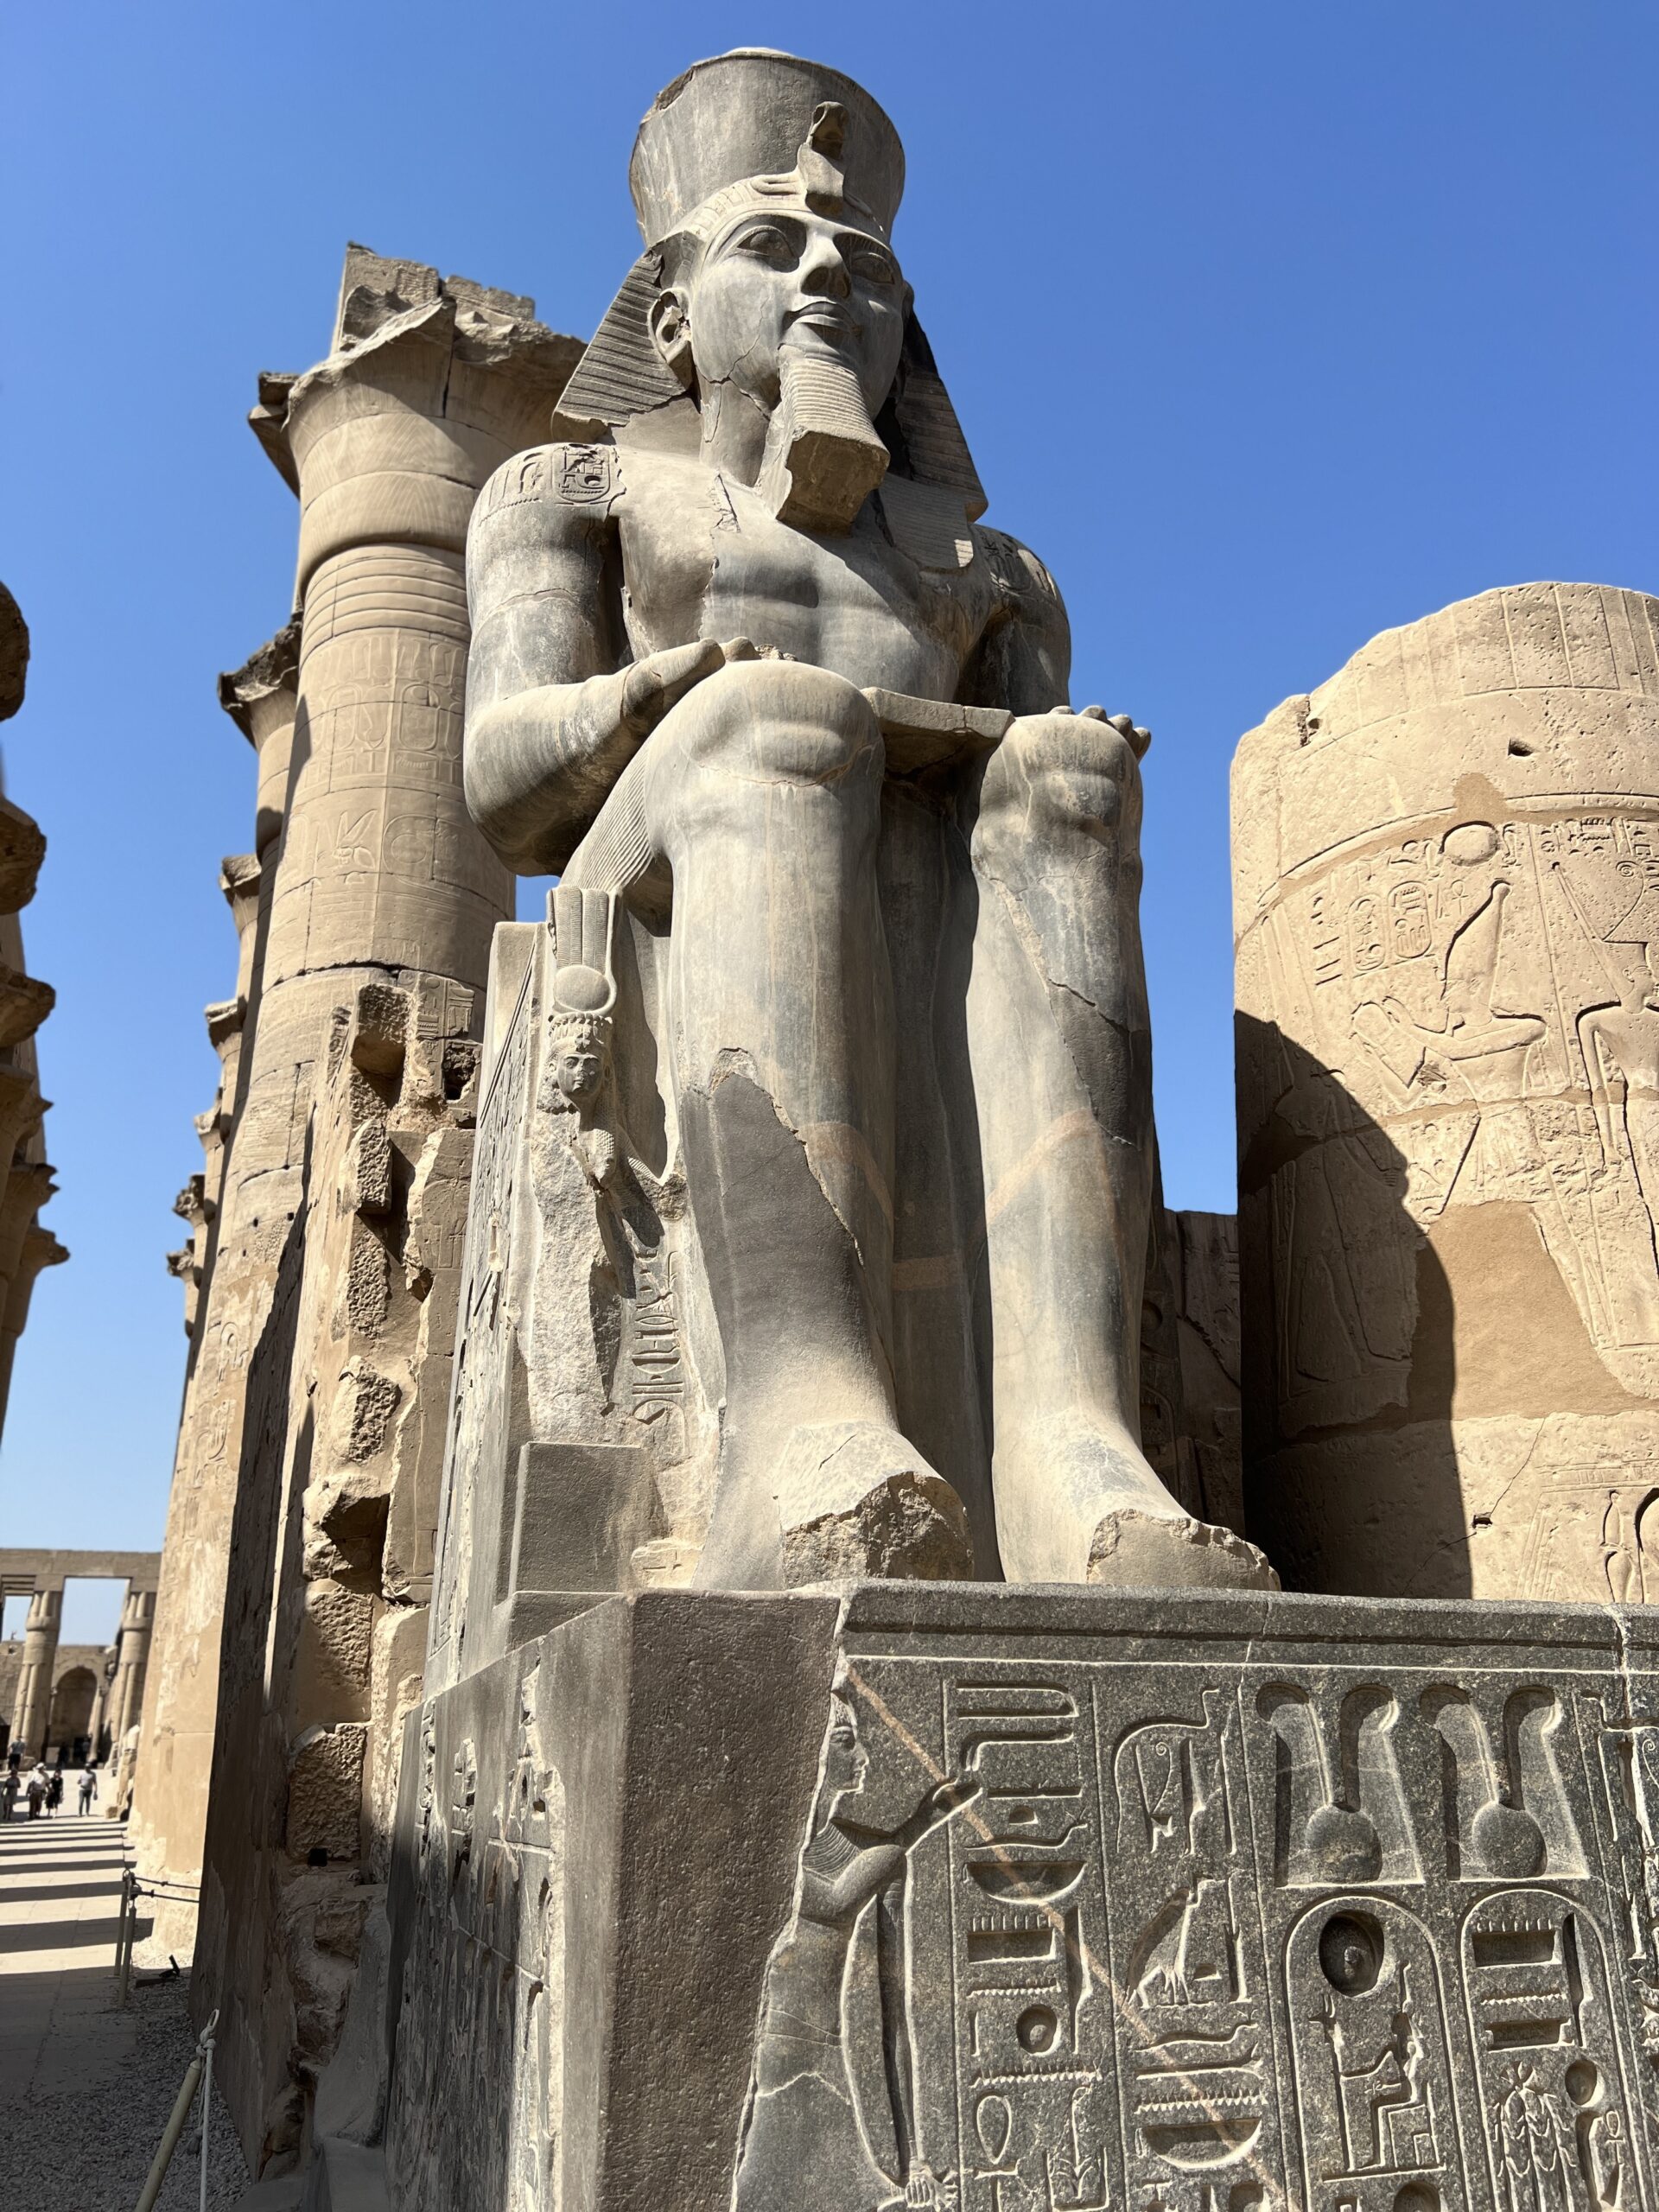 the entrance of Luxor Temple﻿